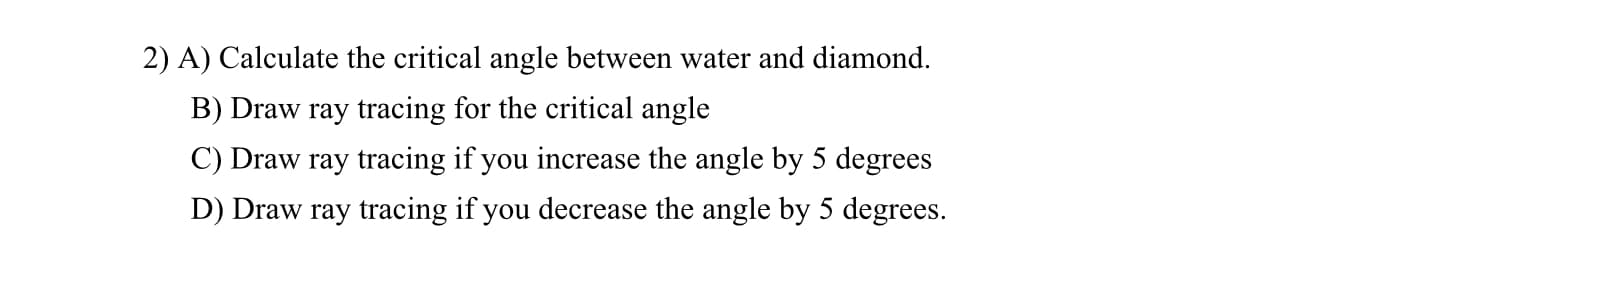 2) A) Calculate the critical angle between water and diamond.
B) Draw ray tracing for the critical angle
C) Draw ray tracing if you increase the angle by 5 degrees
D) Draw ray tracing if you decrease the angle by 5 degrees.
